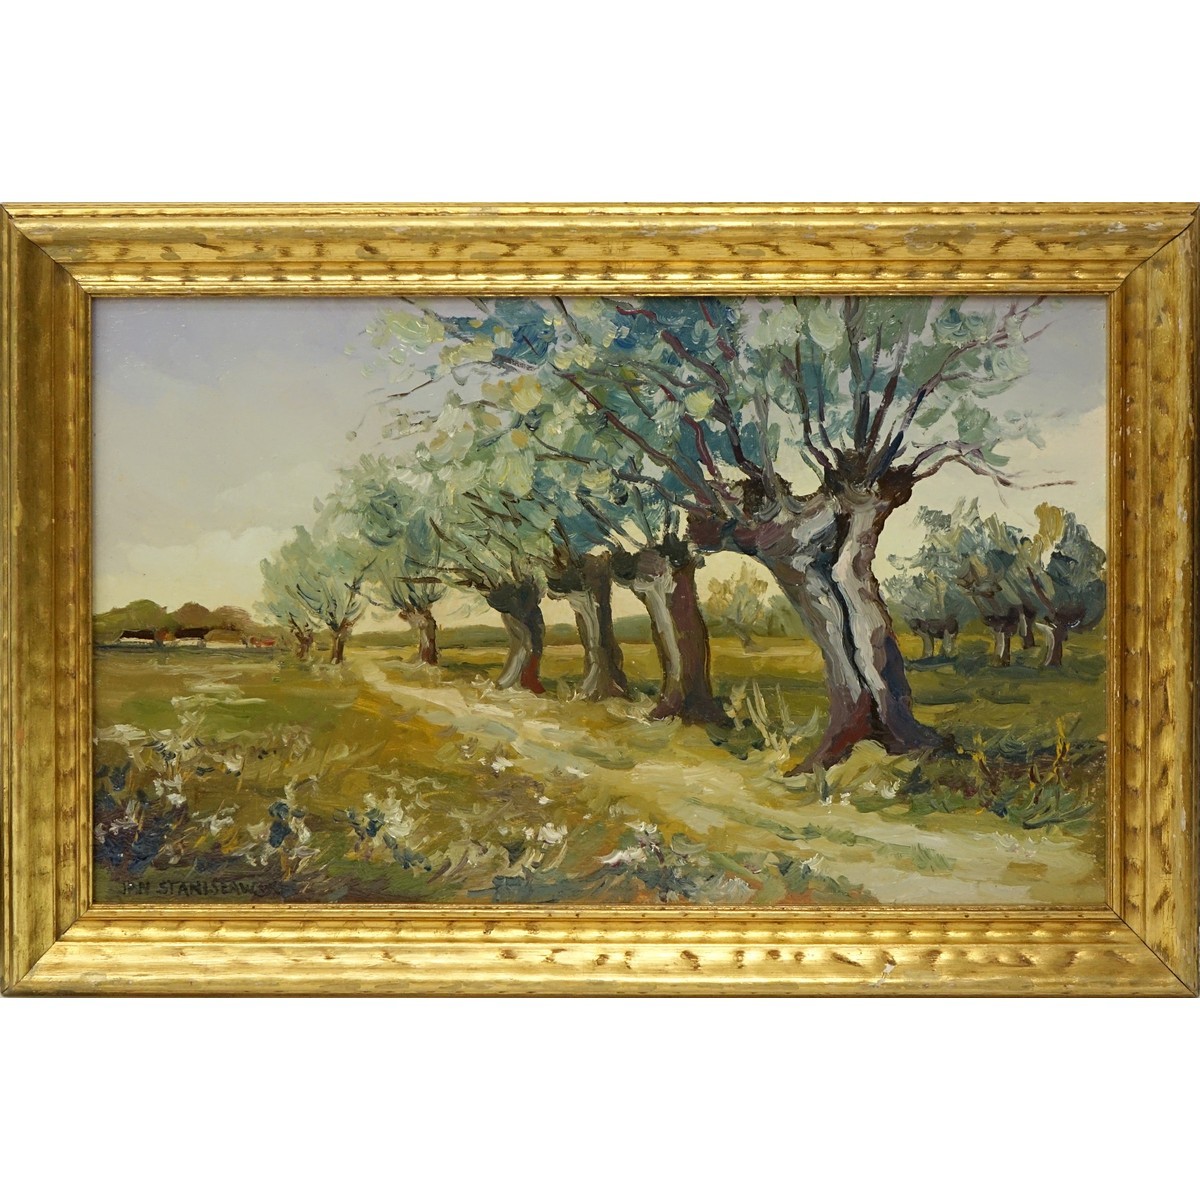 Attributed to: Jan Stanislawski, Polish (1860 - 1907) Oil on board "Landscape With Trees"  Signed lower left. Good condition.